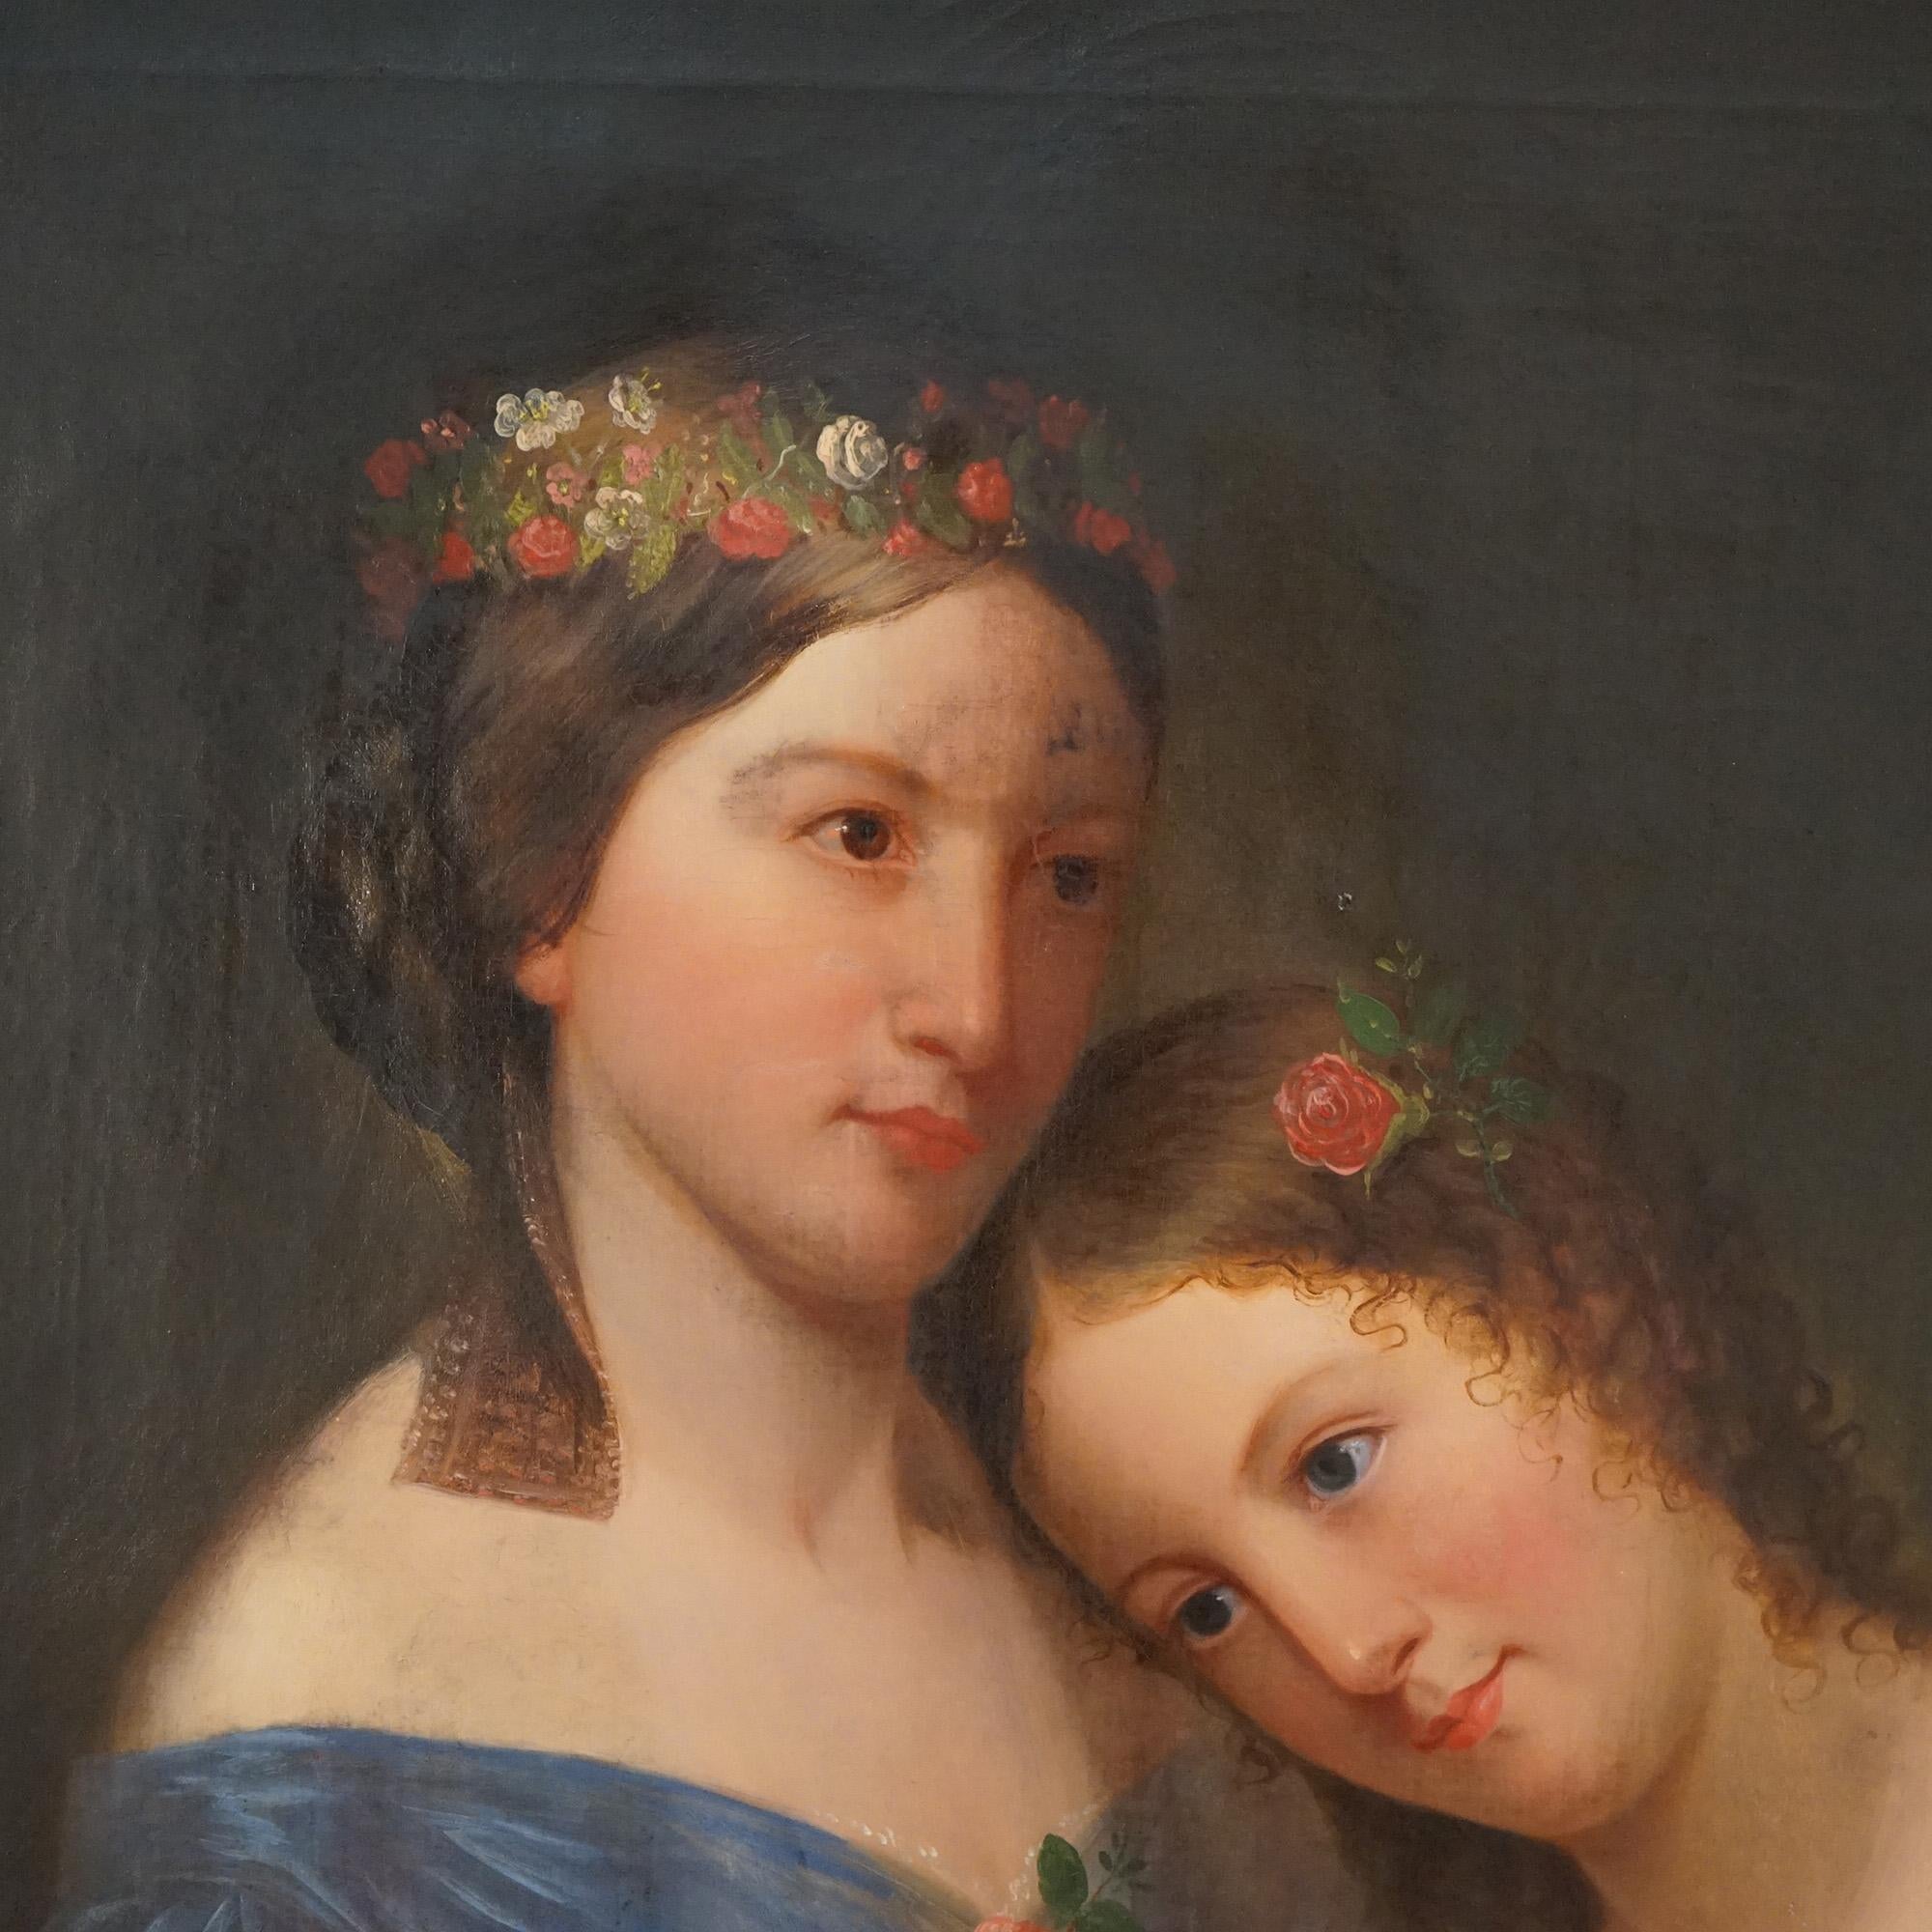 19th Century Antique Double Portrait Oil Painting with Roses & Original Giltwood Frame c1840 For Sale